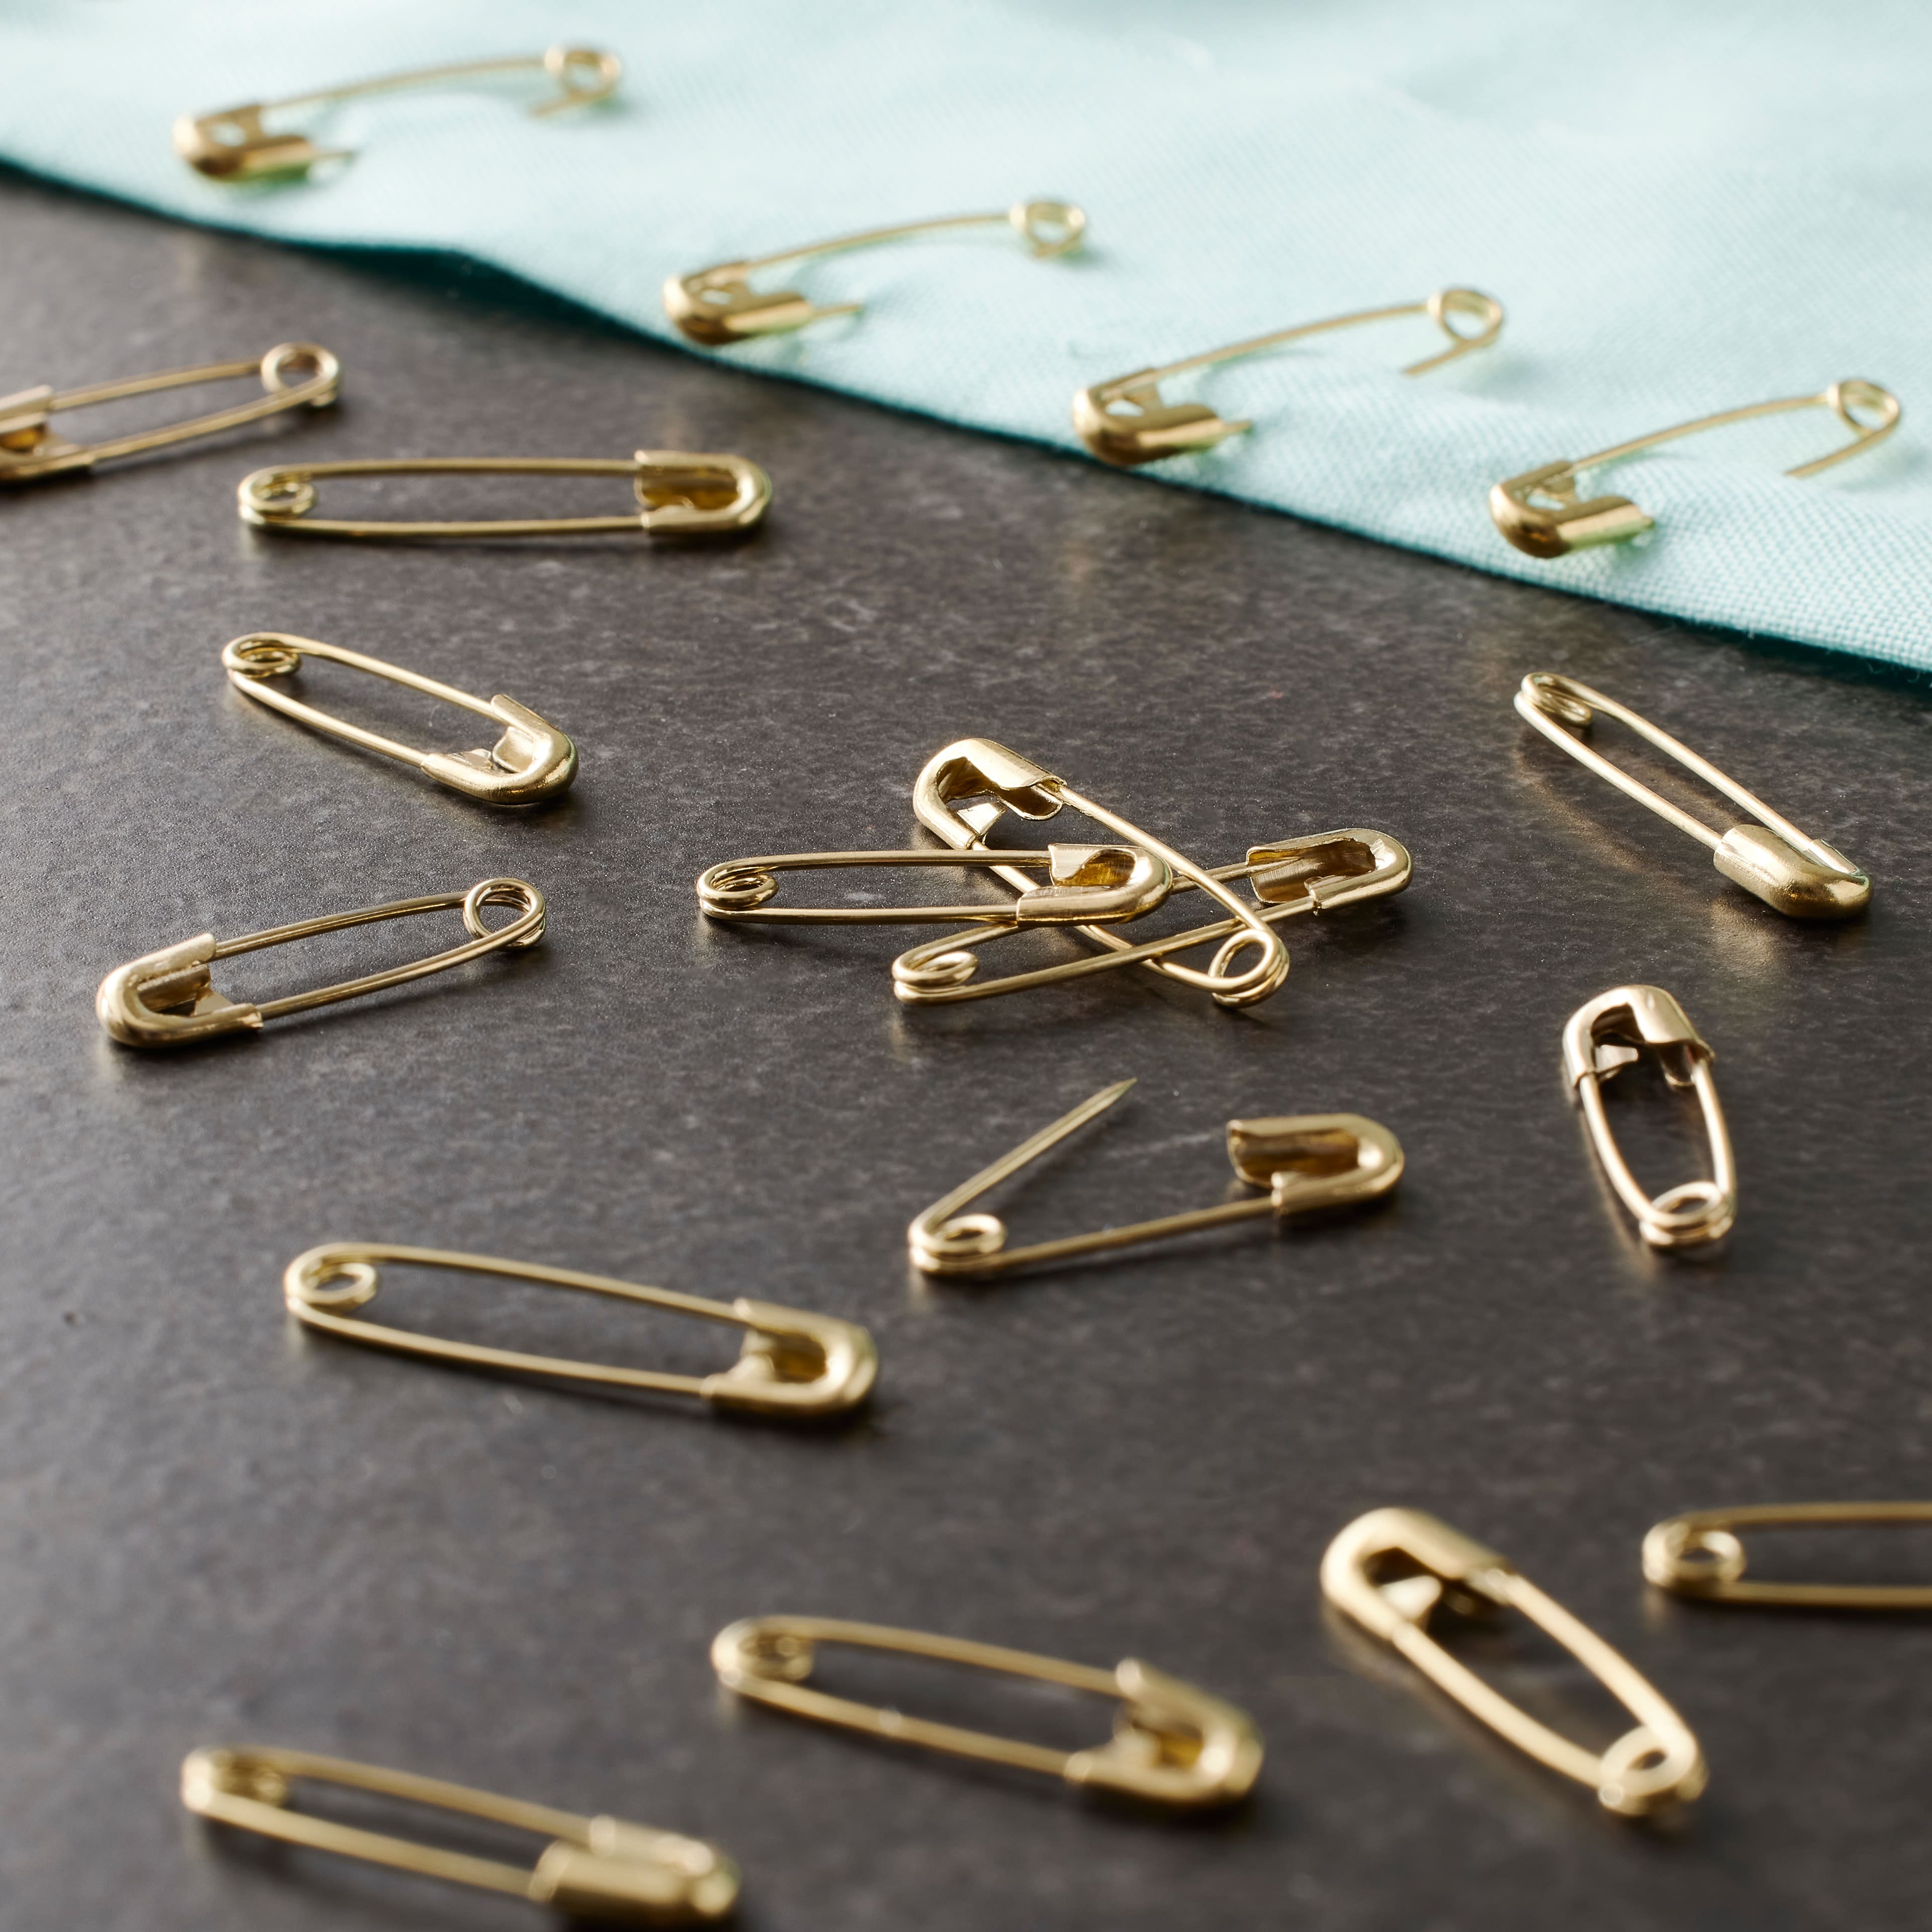 Loops & Threads 3/4 & 7/8 Safety Pins - Each